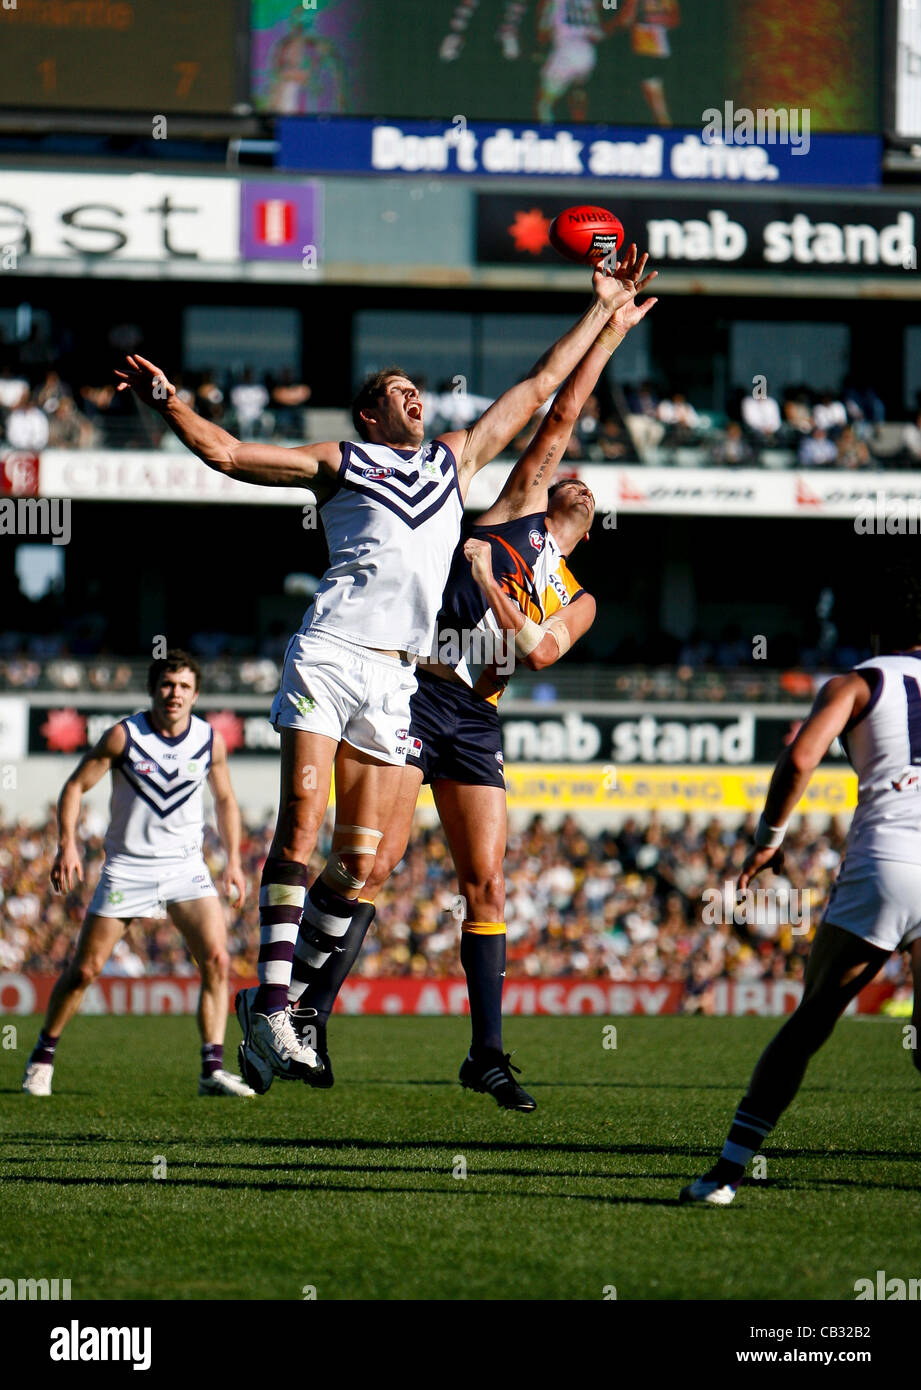 27.05.2012 Subiaco, Australia. Fremantle v West Coast Eagles. Aaron Sandilands and Dean Cox contest a boundary throw in during the Round 9 game played at Patersons Stadium. Stock Photo